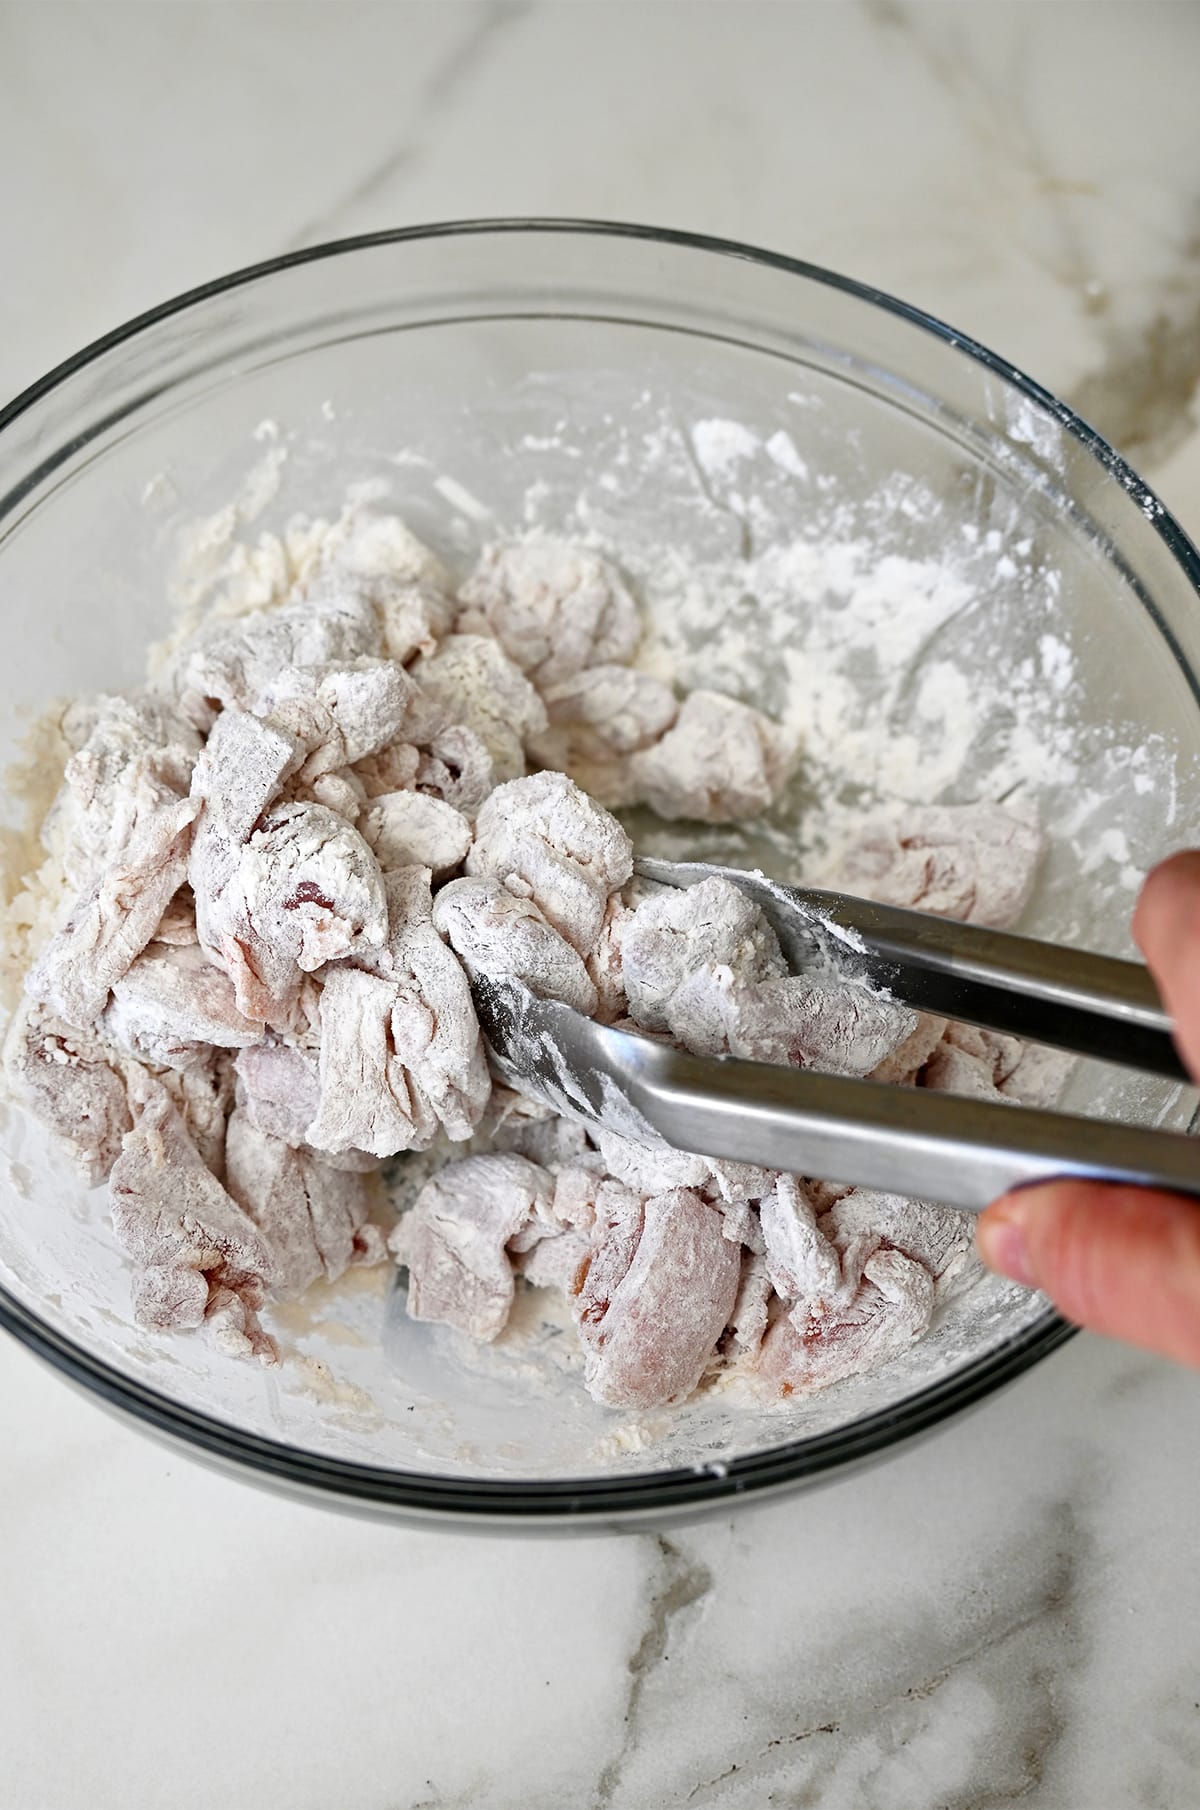 A hand holding tongs tosses chicken pieces in a mixture of flour and cornstarch in a glass bowl.